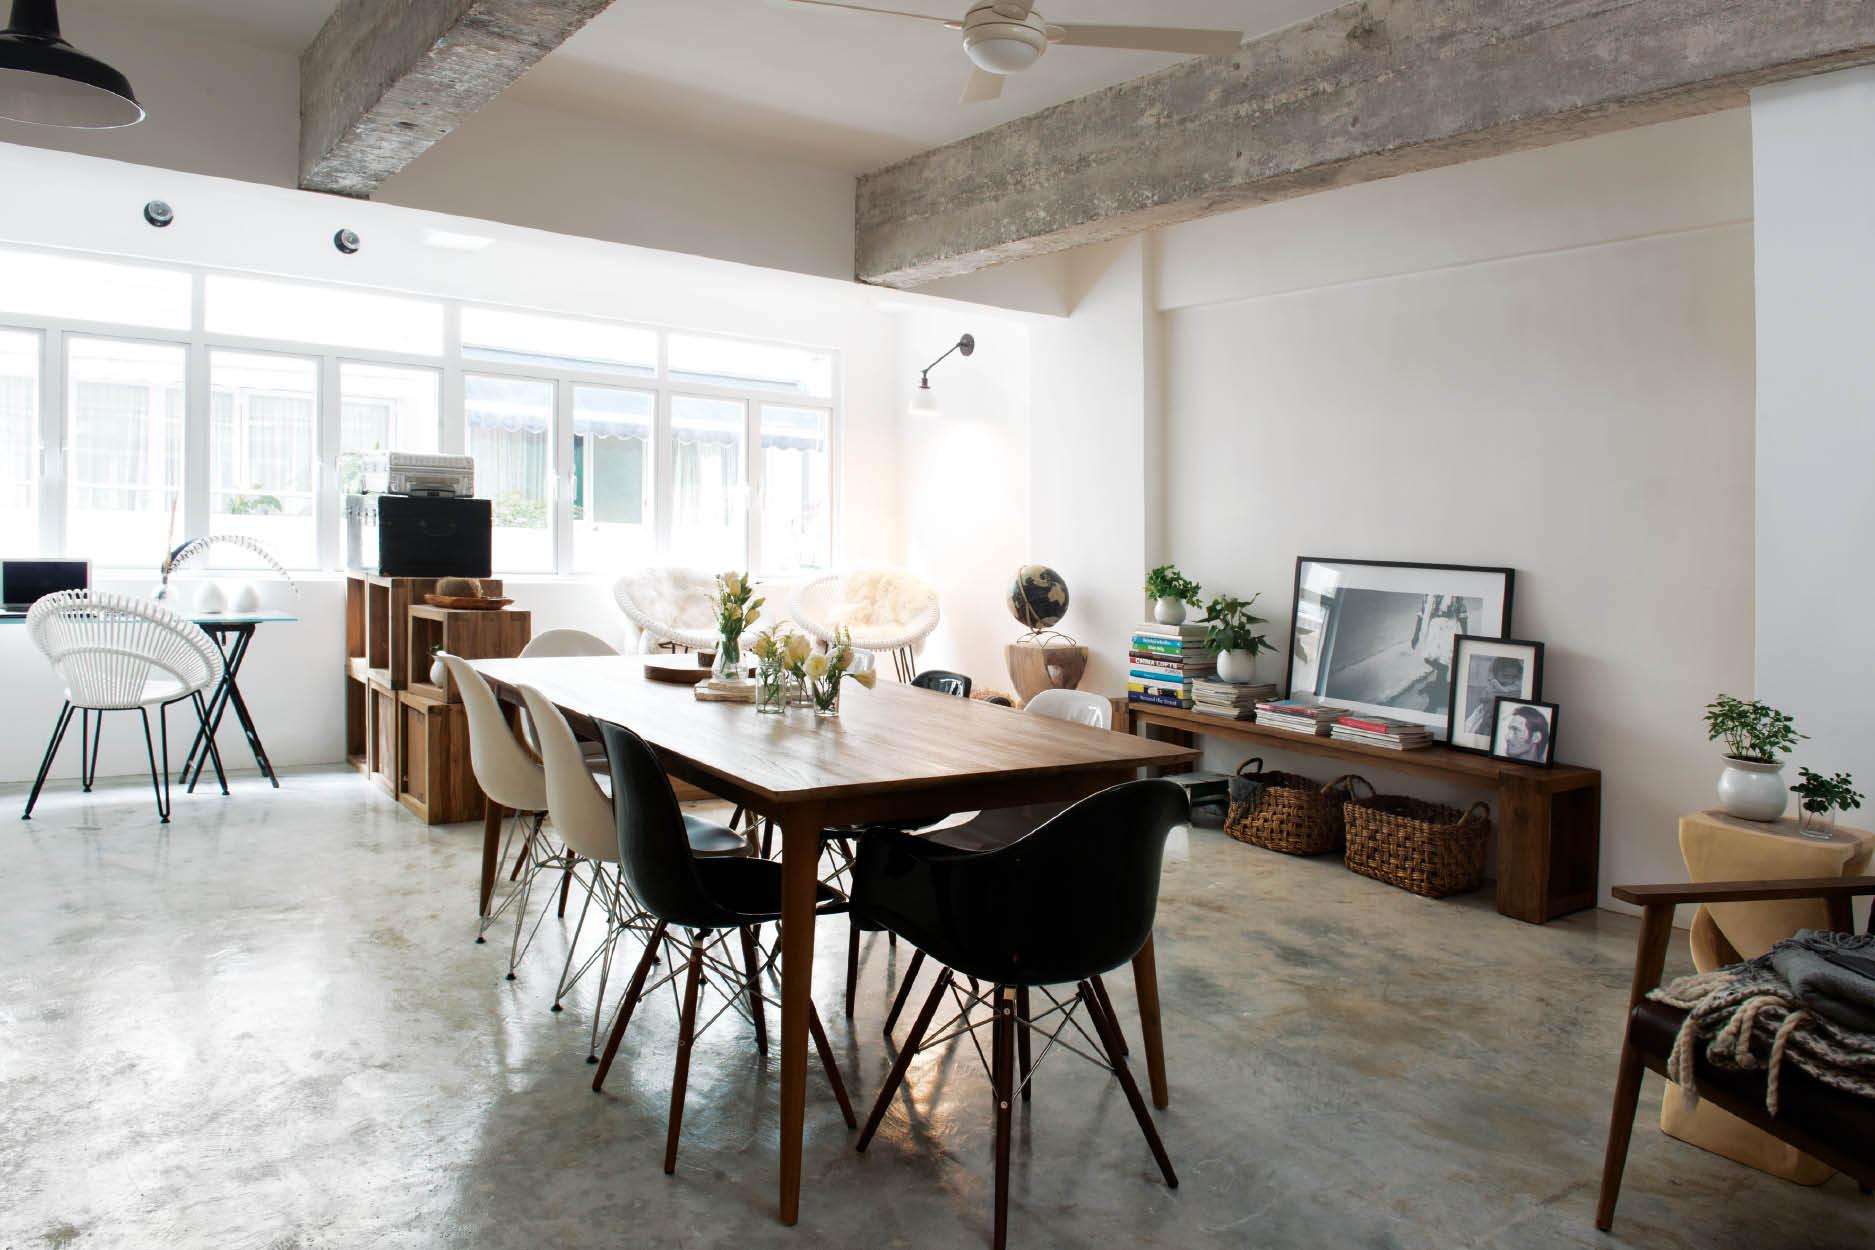 This 750sqft Studio Apartment in Sheung Wan is an Airy, Lofty Home